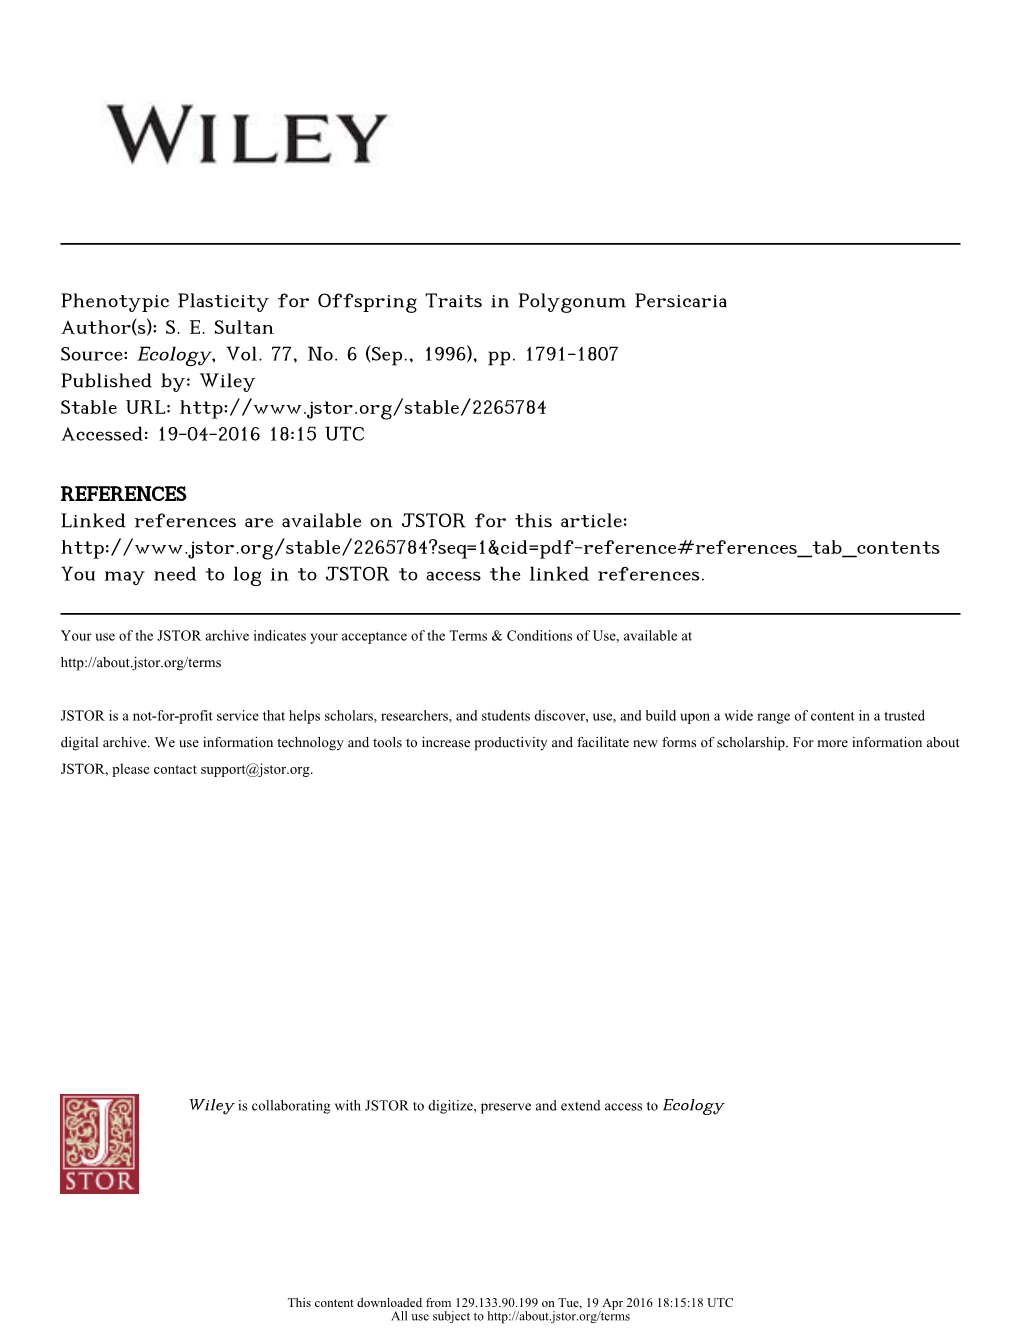 Phenotypic Plasticity for Offspring Traits in Polygonum Persicaria Author(S): S